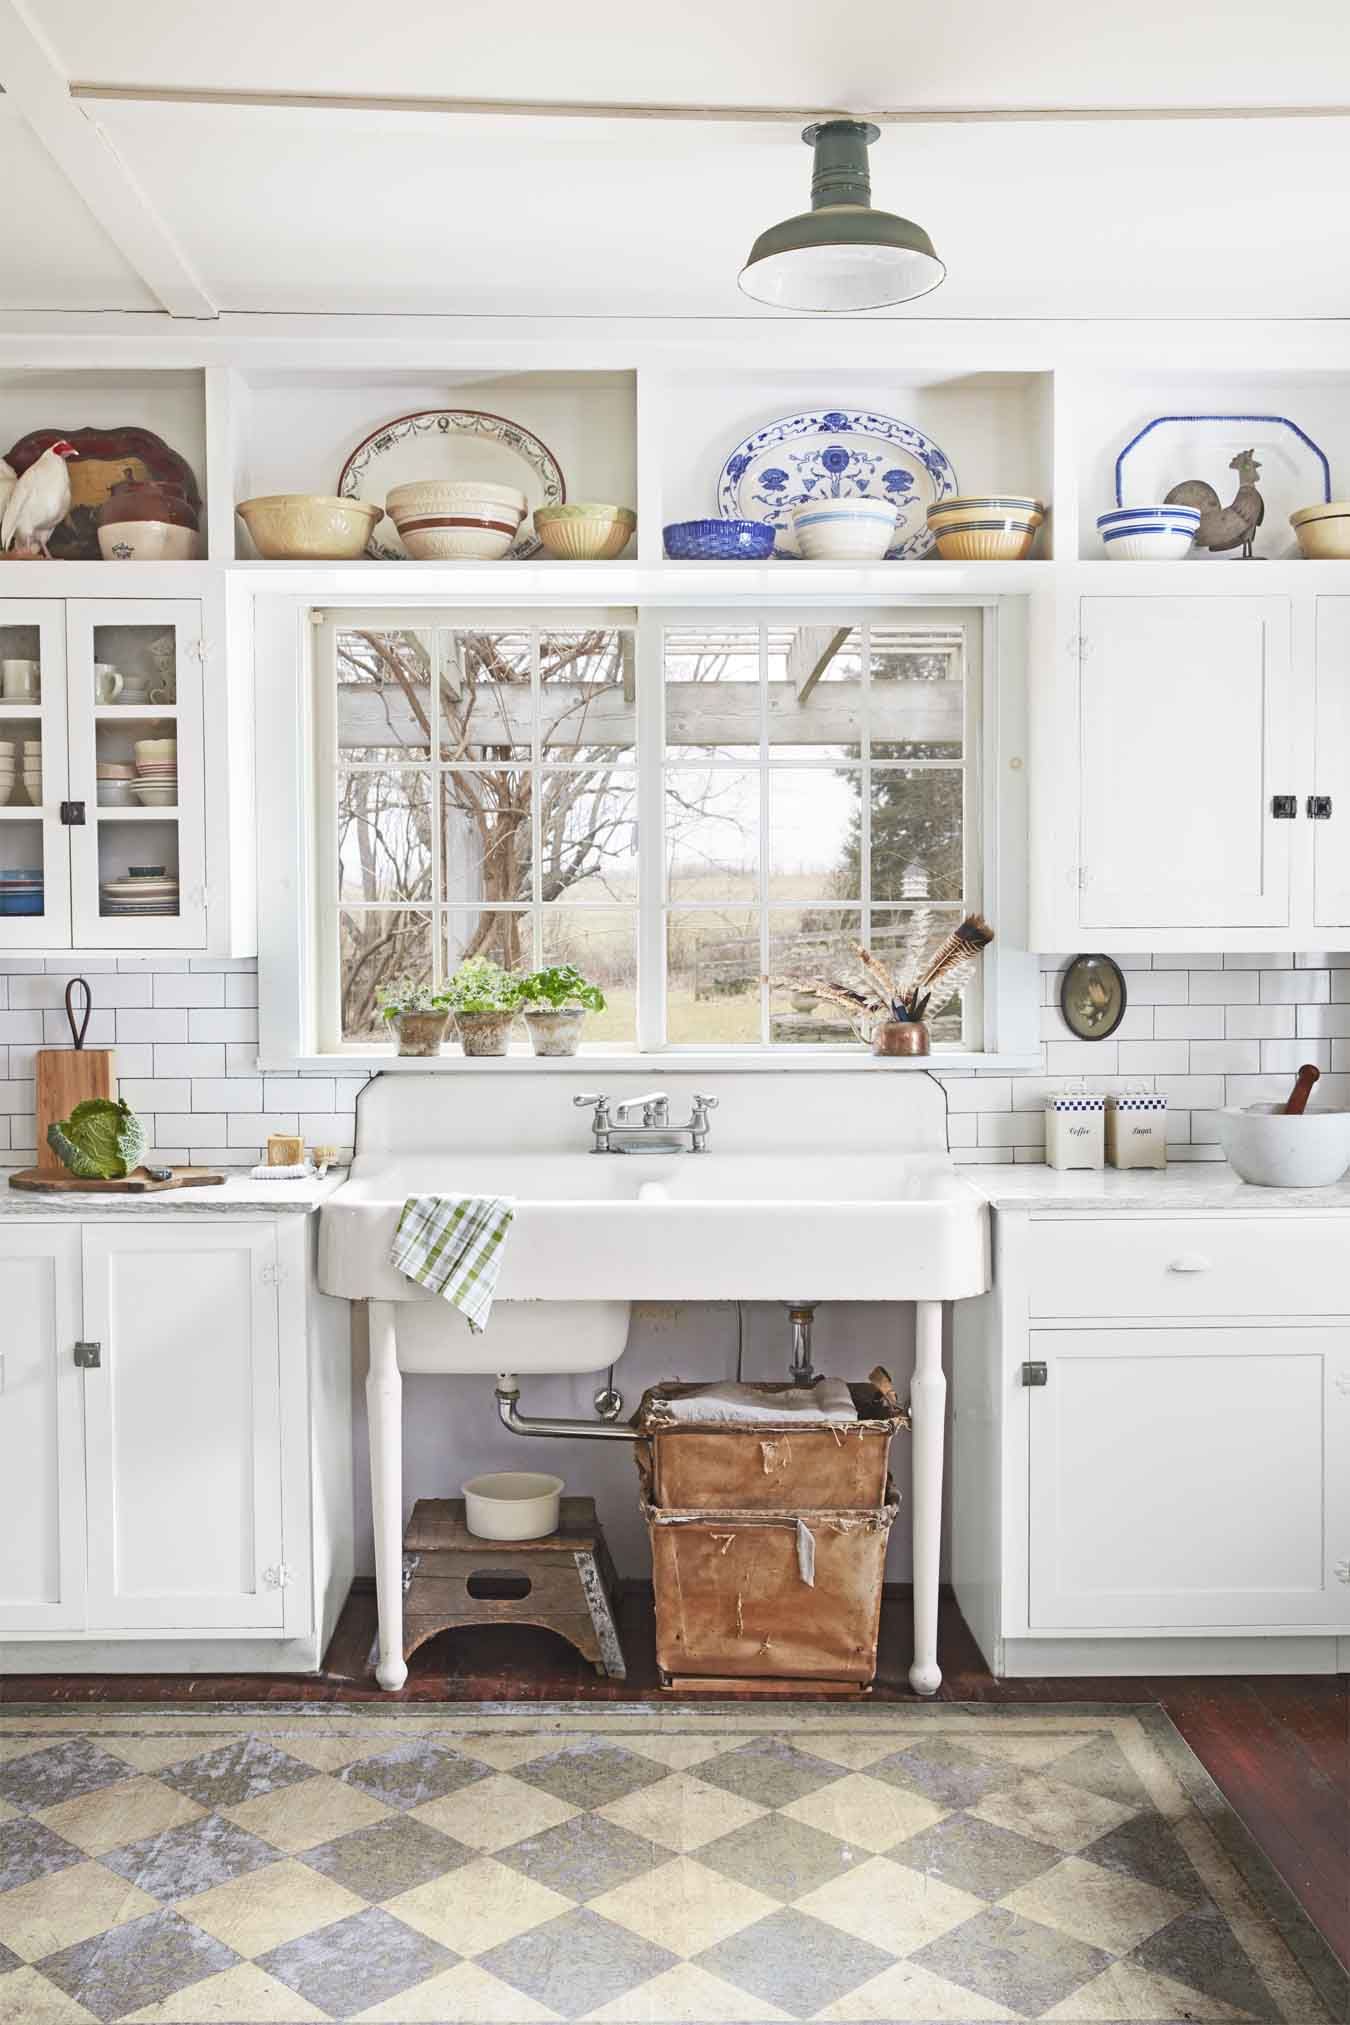 https://hips.hearstapps.com/countryliving/assets/17/08/great-escape-kitchen-1116_1.jpg